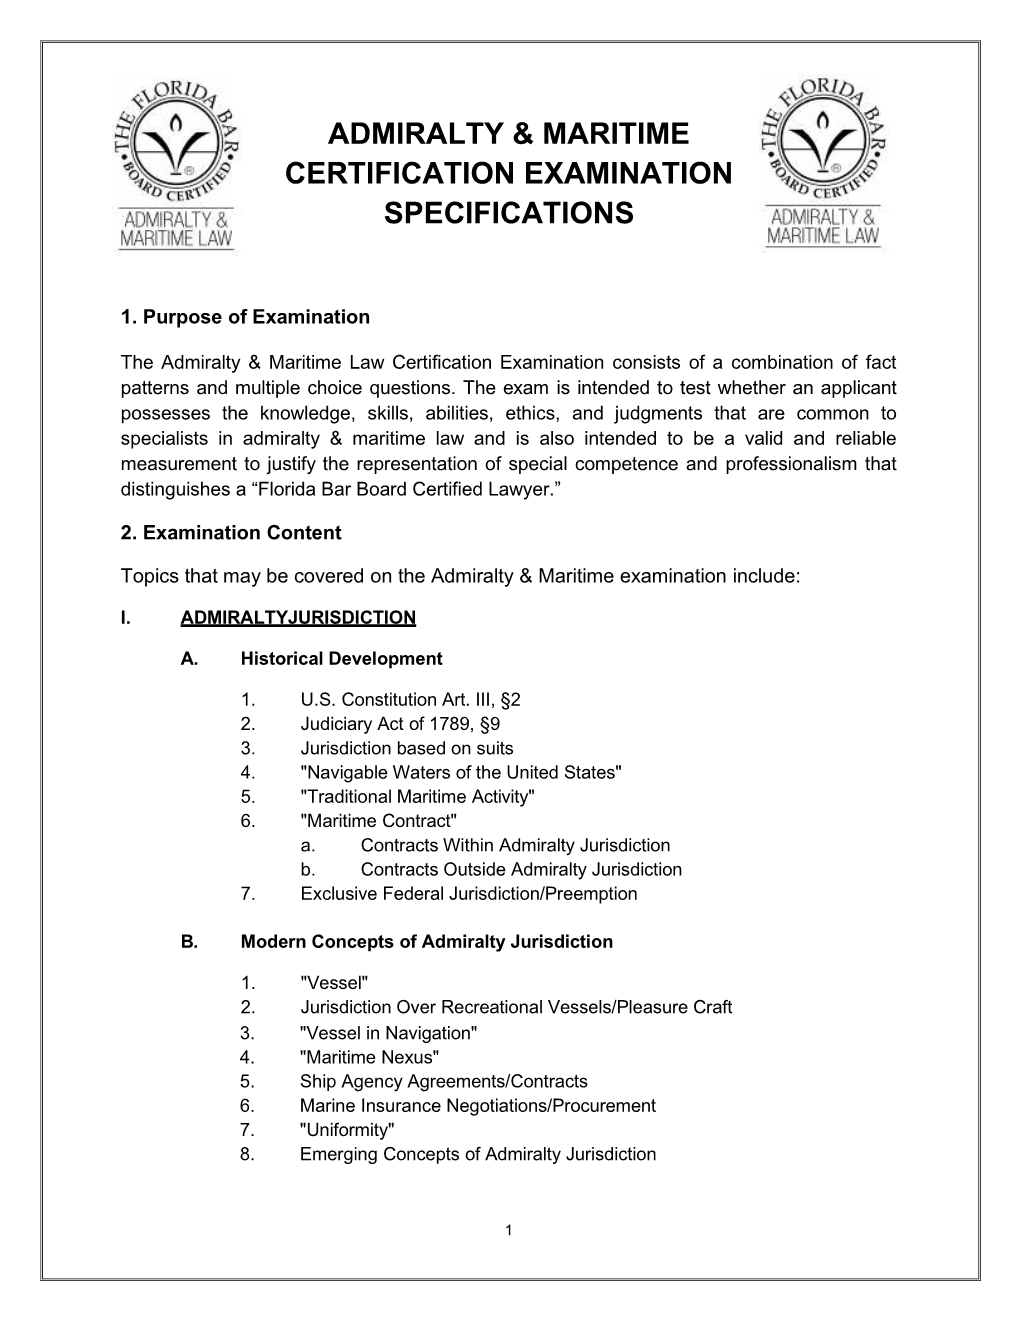 Admiralty & Maritime Certification Examination Specifications